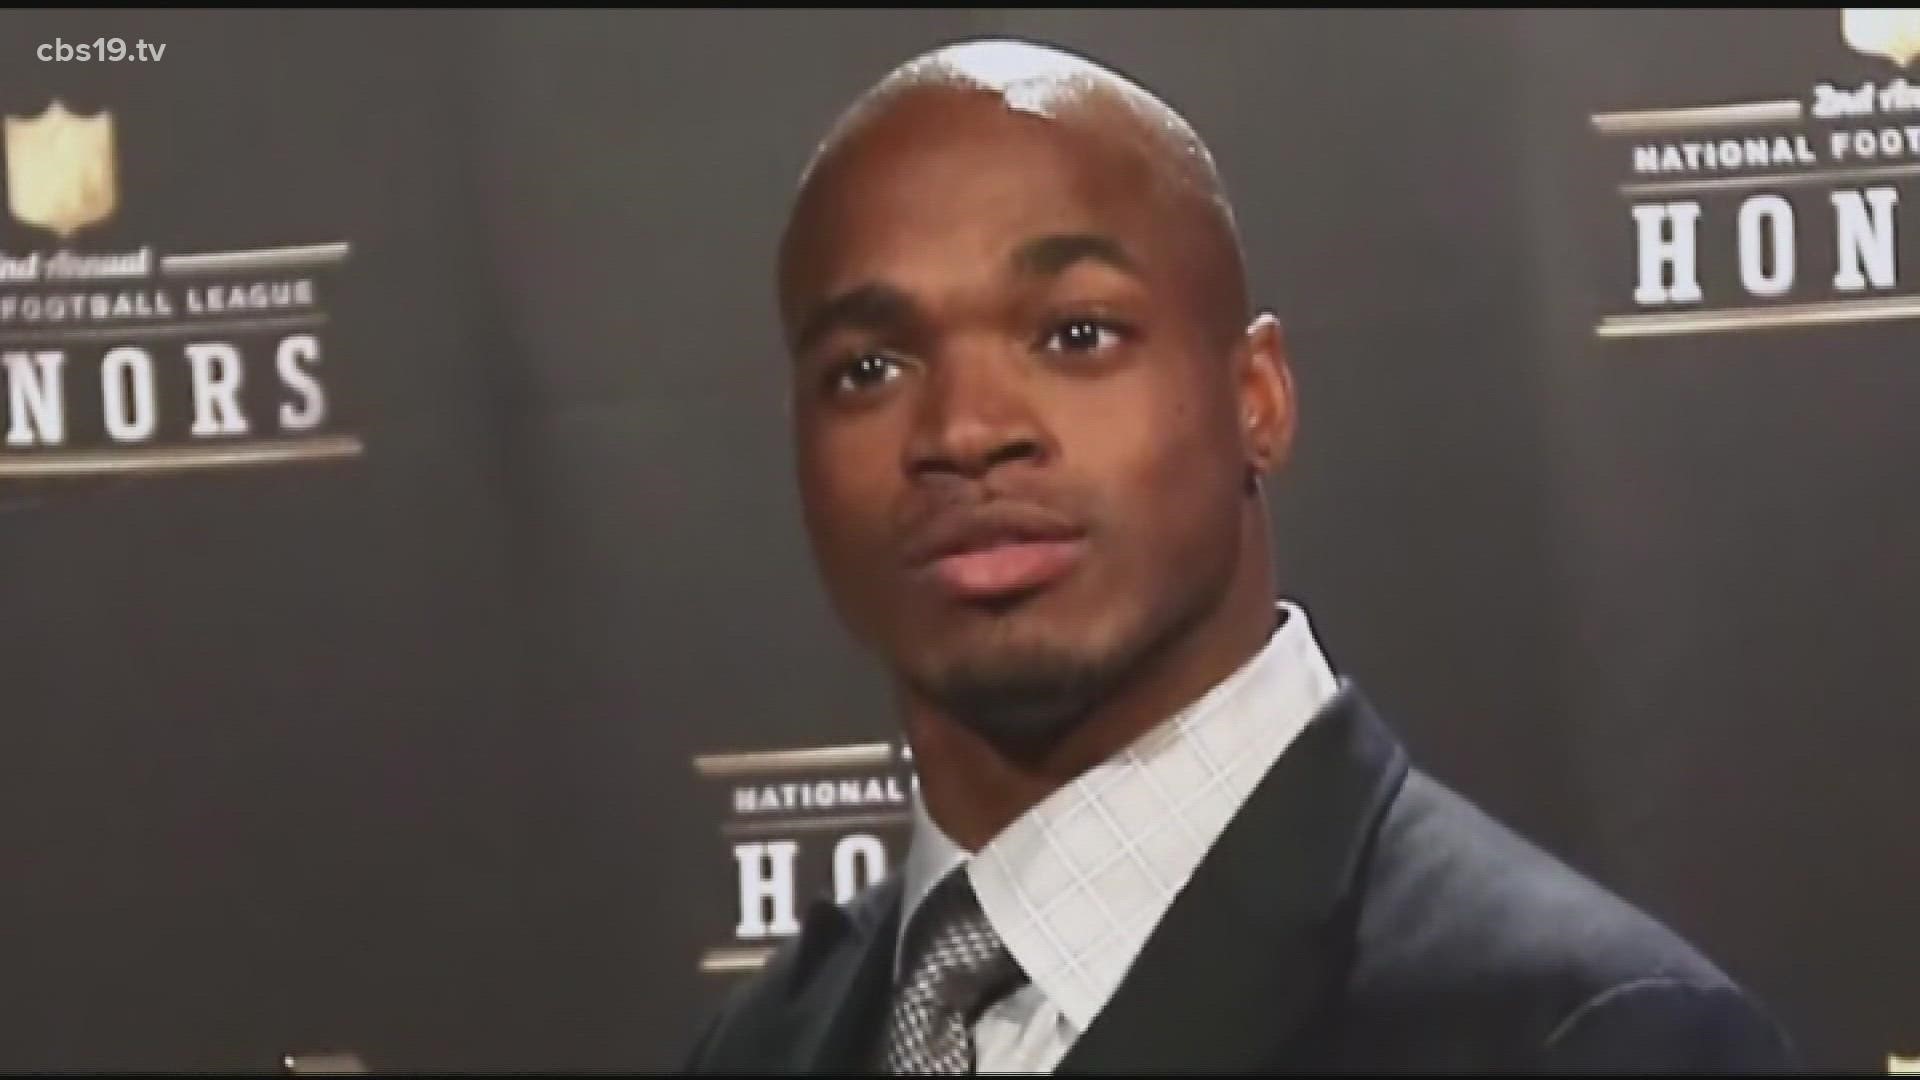 Adrian Peterson is an East Texas alum who is a seven-time pro bowl running back who led the NFL in rushing three different seasons, the last being in 2015.